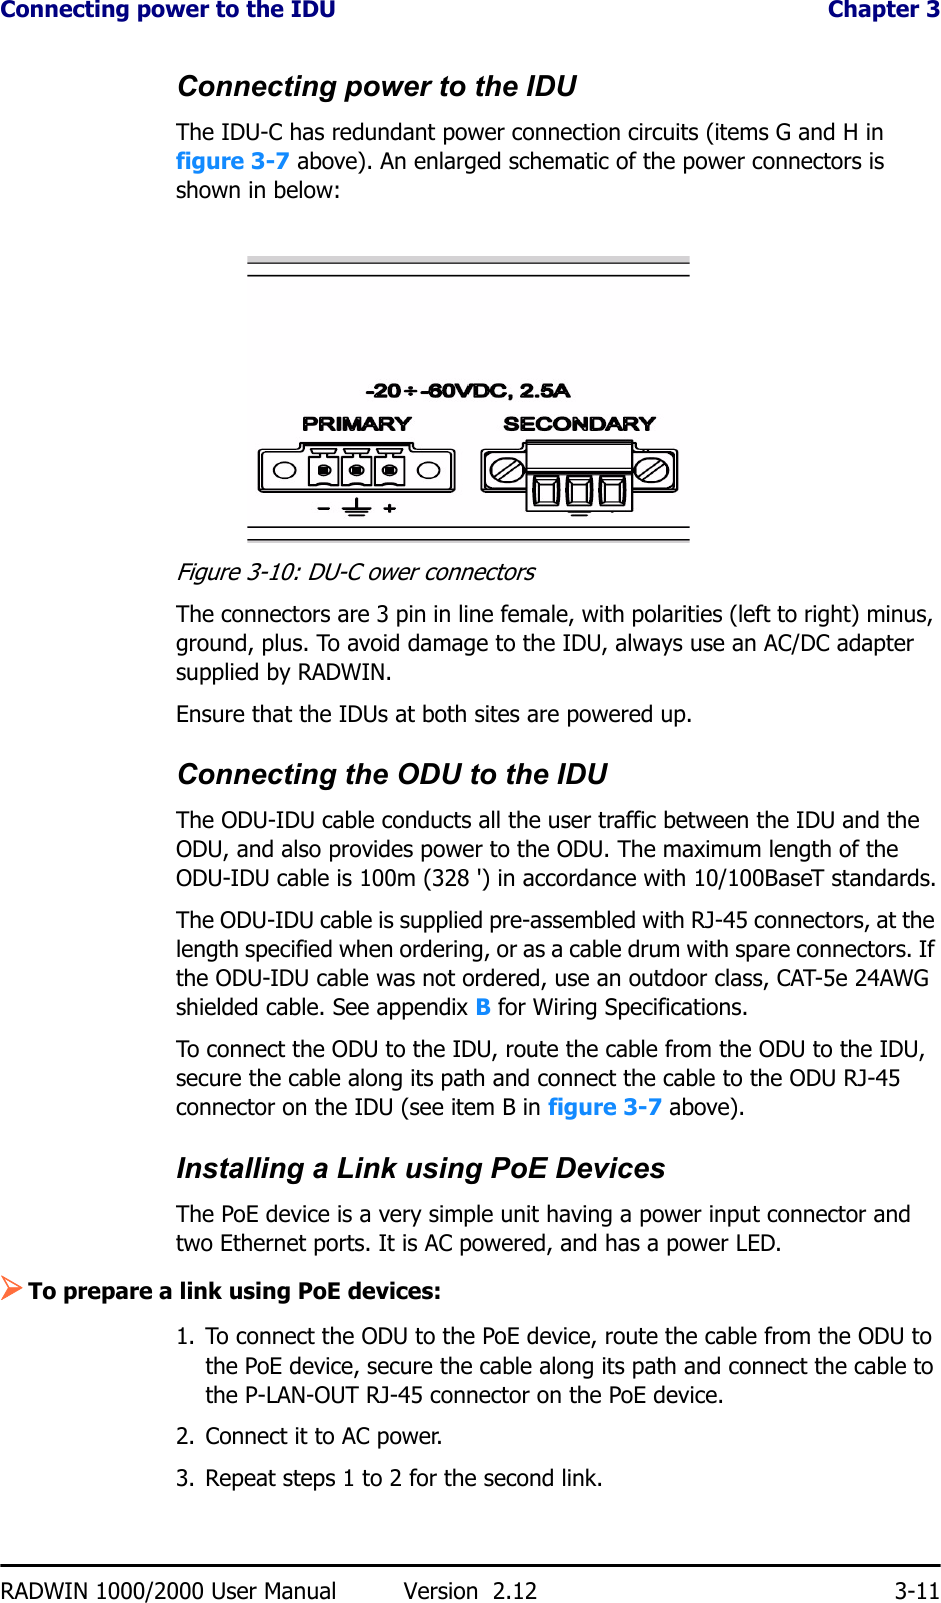 Connecting power to the IDU  Chapter 3RADWIN 1000/2000 User Manual Version  2.12 3-11Connecting power to the IDUThe IDU-C has redundant power connection circuits (items G and H in figure 3-7 above). An enlarged schematic of the power connectors is shown in below:Figure 3-10: DU-C ower connectorsThe connectors are 3 pin in line female, with polarities (left to right) minus, ground, plus. To avoid damage to the IDU, always use an AC/DC adapter supplied by RADWIN.Ensure that the IDUs at both sites are powered up.Connecting the ODU to the IDUThe ODU-IDU cable conducts all the user traffic between the IDU and the ODU, and also provides power to the ODU. The maximum length of the ODU-IDU cable is 100m (328 &apos;) in accordance with 10/100BaseT standards.The ODU-IDU cable is supplied pre-assembled with RJ-45 connectors, at the length specified when ordering, or as a cable drum with spare connectors. If the ODU-IDU cable was not ordered, use an outdoor class, CAT-5e 24AWG shielded cable. See appendix B for Wiring Specifications.To connect the ODU to the IDU, route the cable from the ODU to the IDU, secure the cable along its path and connect the cable to the ODU RJ-45 connector on the IDU (see item B in figure 3-7 above).Installing a Link using PoE DevicesThe PoE device is a very simple unit having a power input connector and two Ethernet ports. It is AC powered, and has a power LED.¾To prepare a link using PoE devices:1. To connect the ODU to the PoE device, route the cable from the ODU to the PoE device, secure the cable along its path and connect the cable to the P-LAN-OUT RJ-45 connector on the PoE device.2. Connect it to AC power.3. Repeat steps 1 to 2 for the second link.